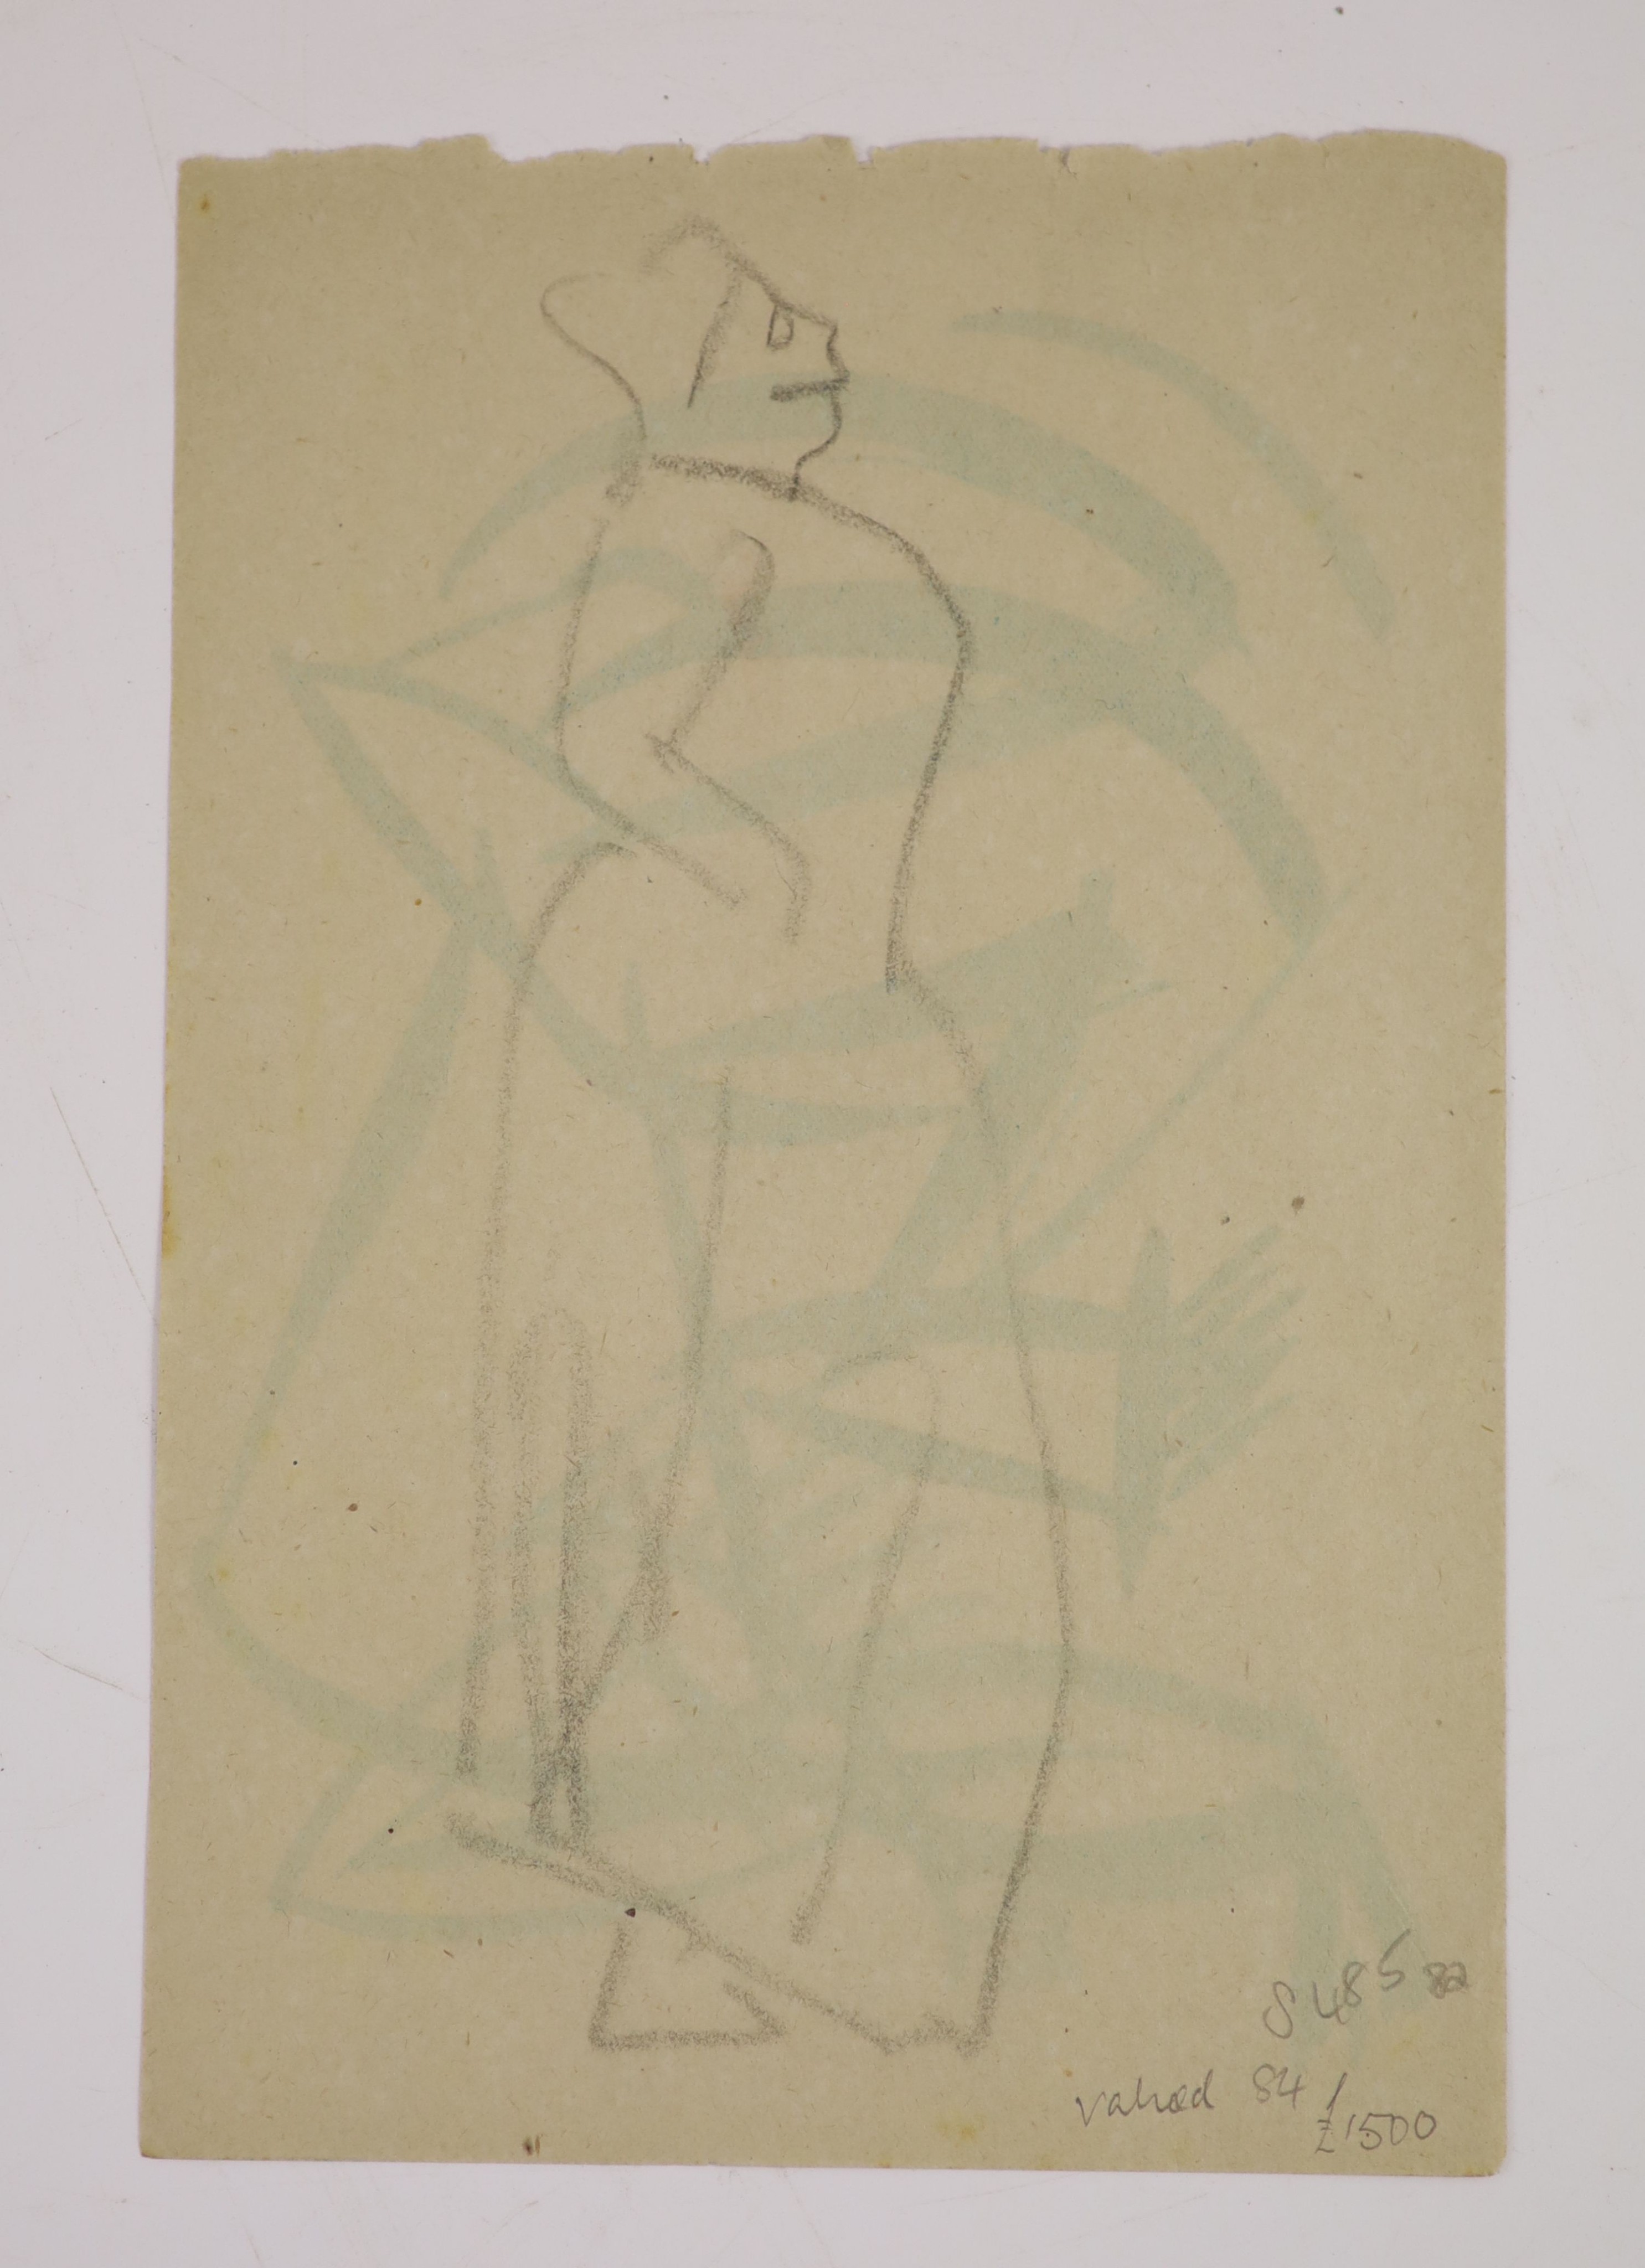 Henri Gaudier-Brzeska (1891-1915), Standing woman in profile, an abstract sketch to verso, in green watercolour, charcoal on paper, 14 x 21cms., unframed